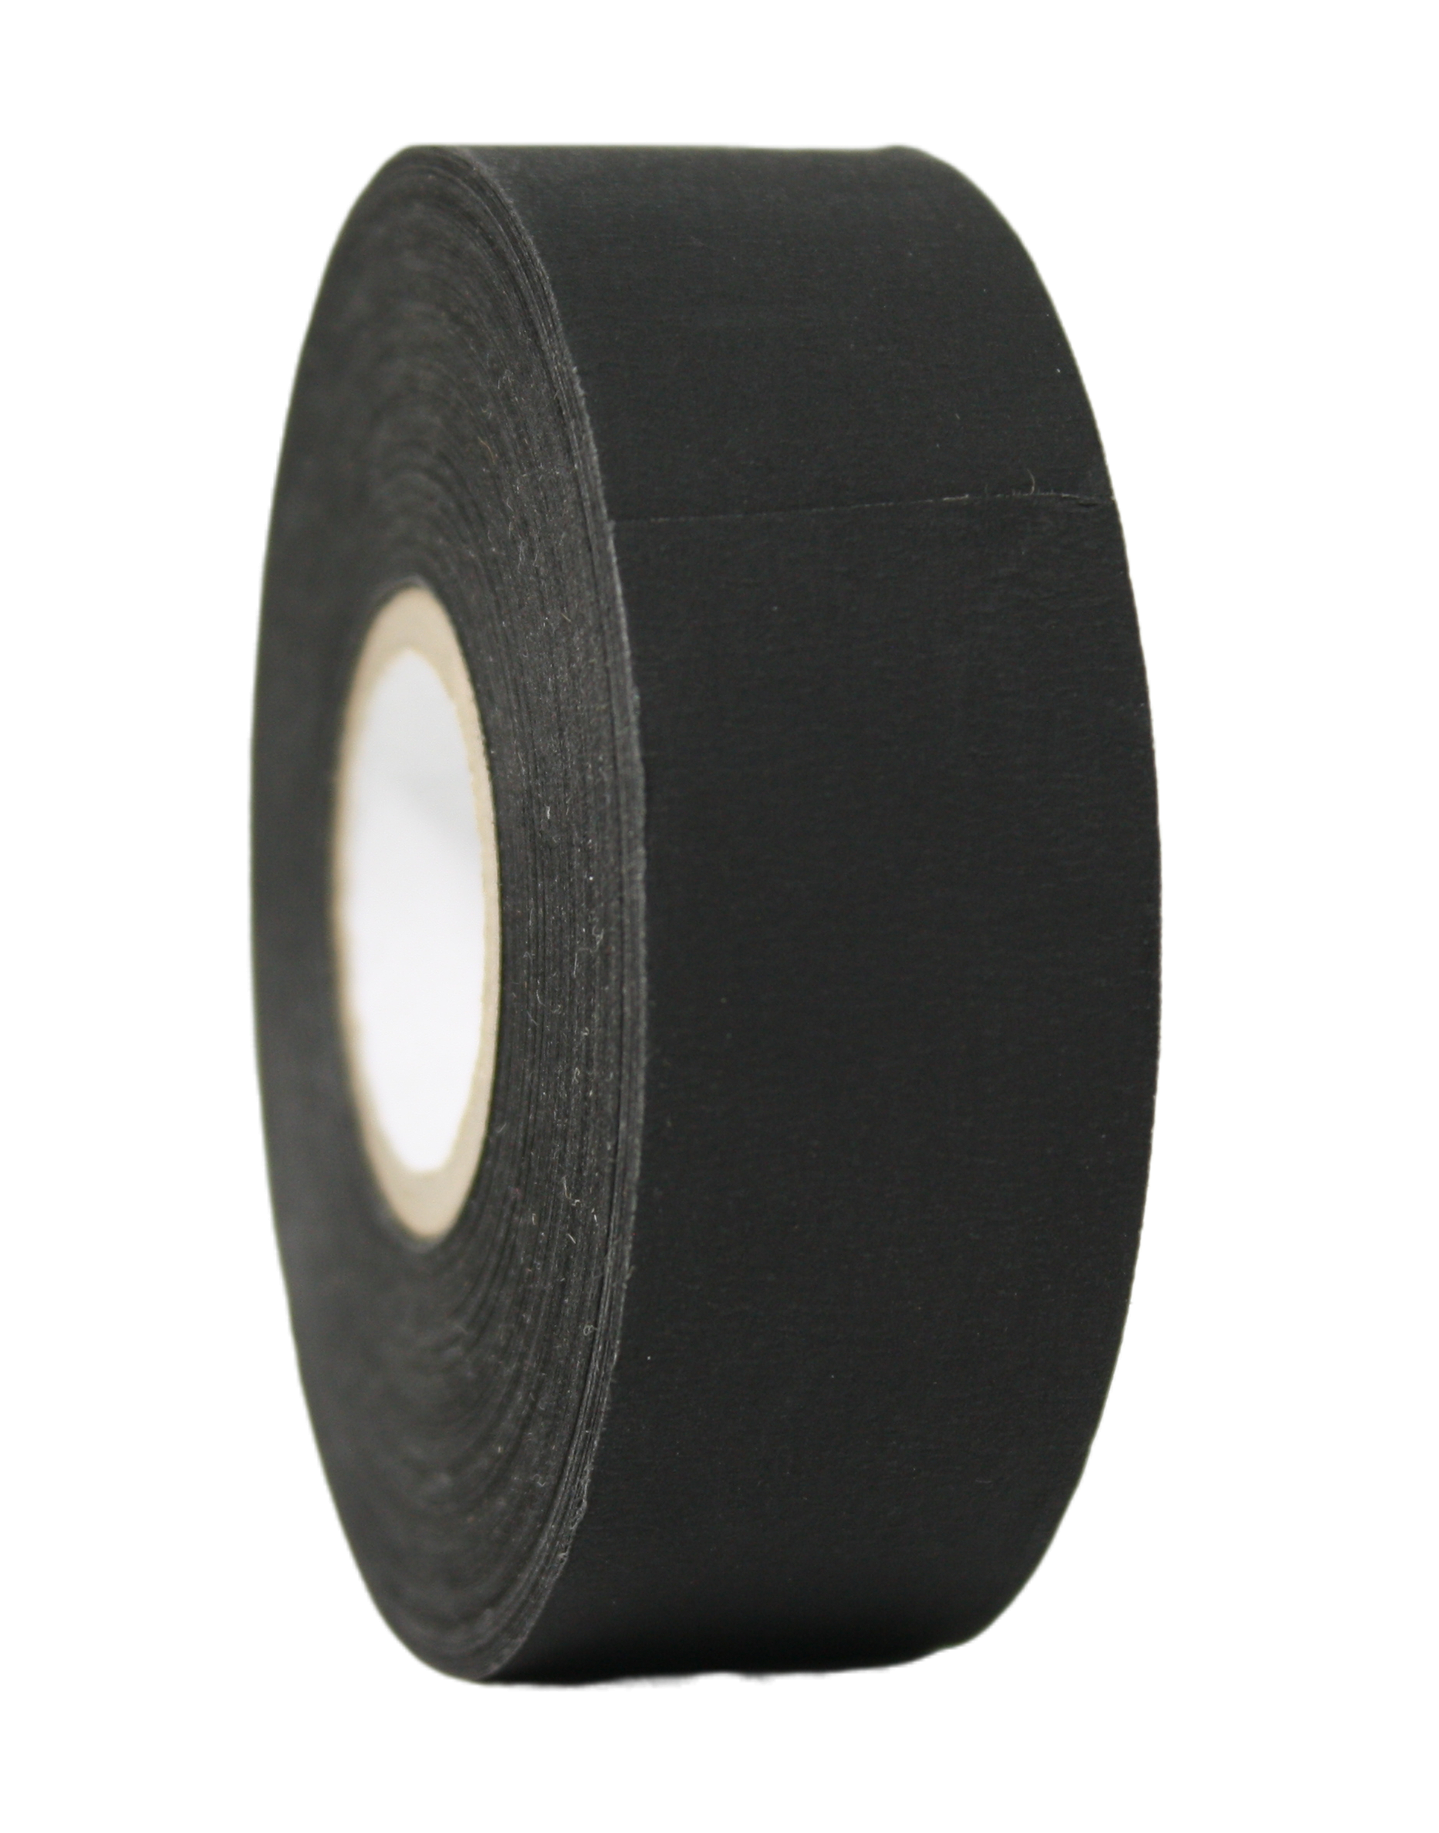 Shurtape CP-743 Matte Photo Tape, 1", small core roll, side view, with a focus on the texture of the tape